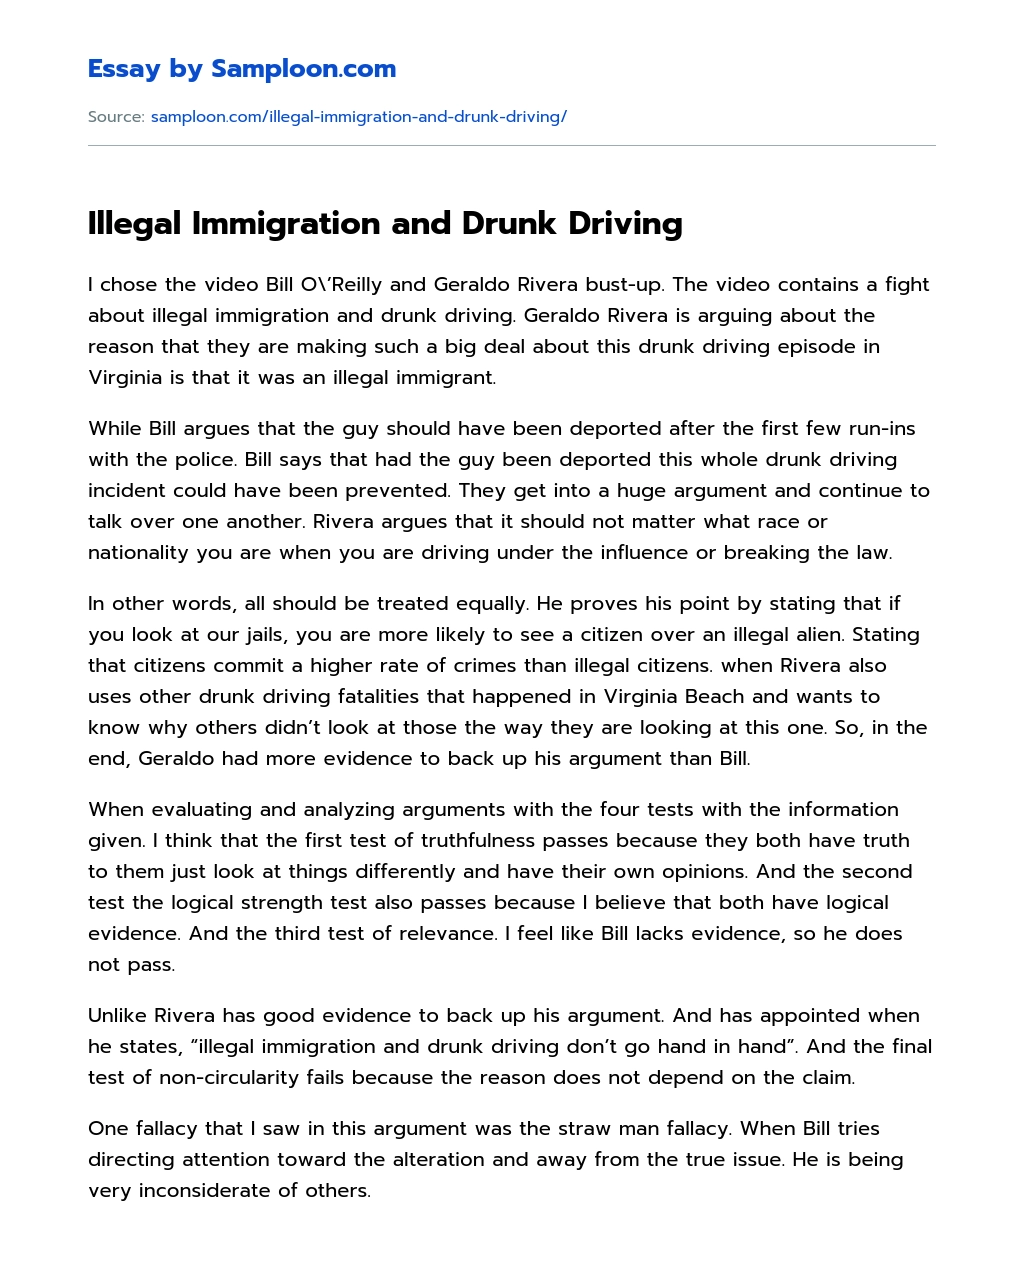 Illegal Immigration and Drunk Driving essay